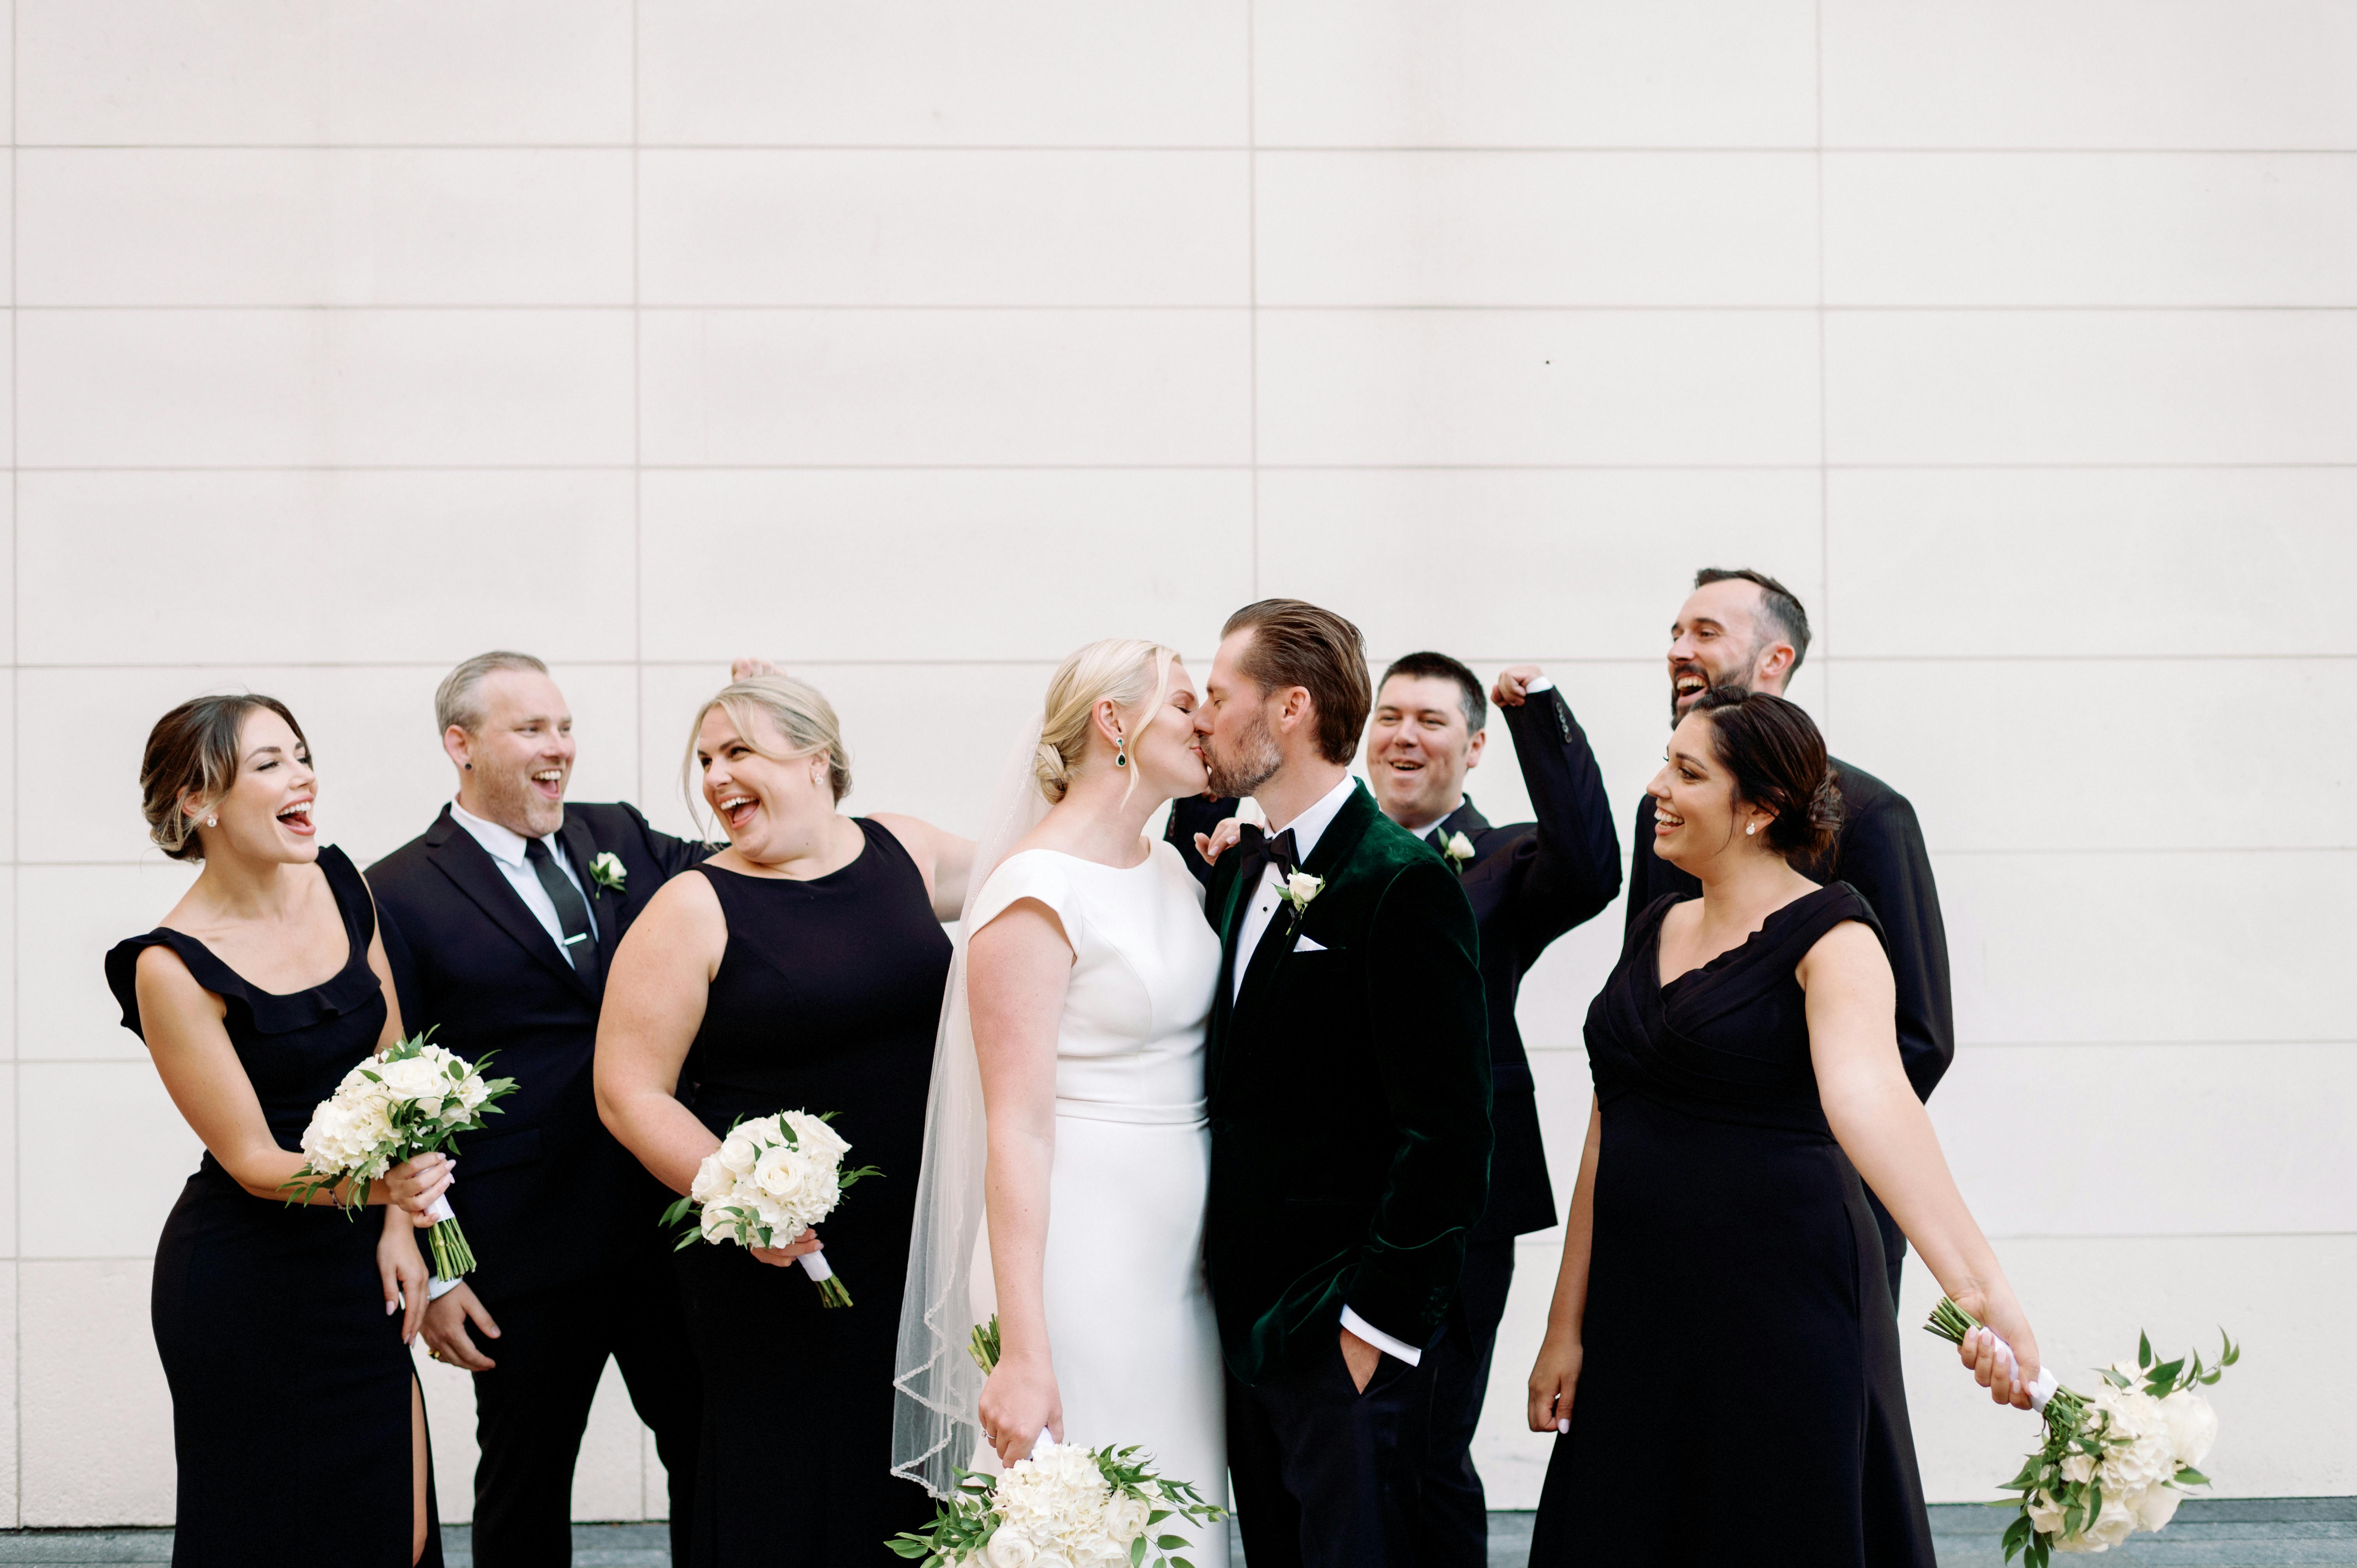 Bride and groom kissing in front of guests | Source: Pexels